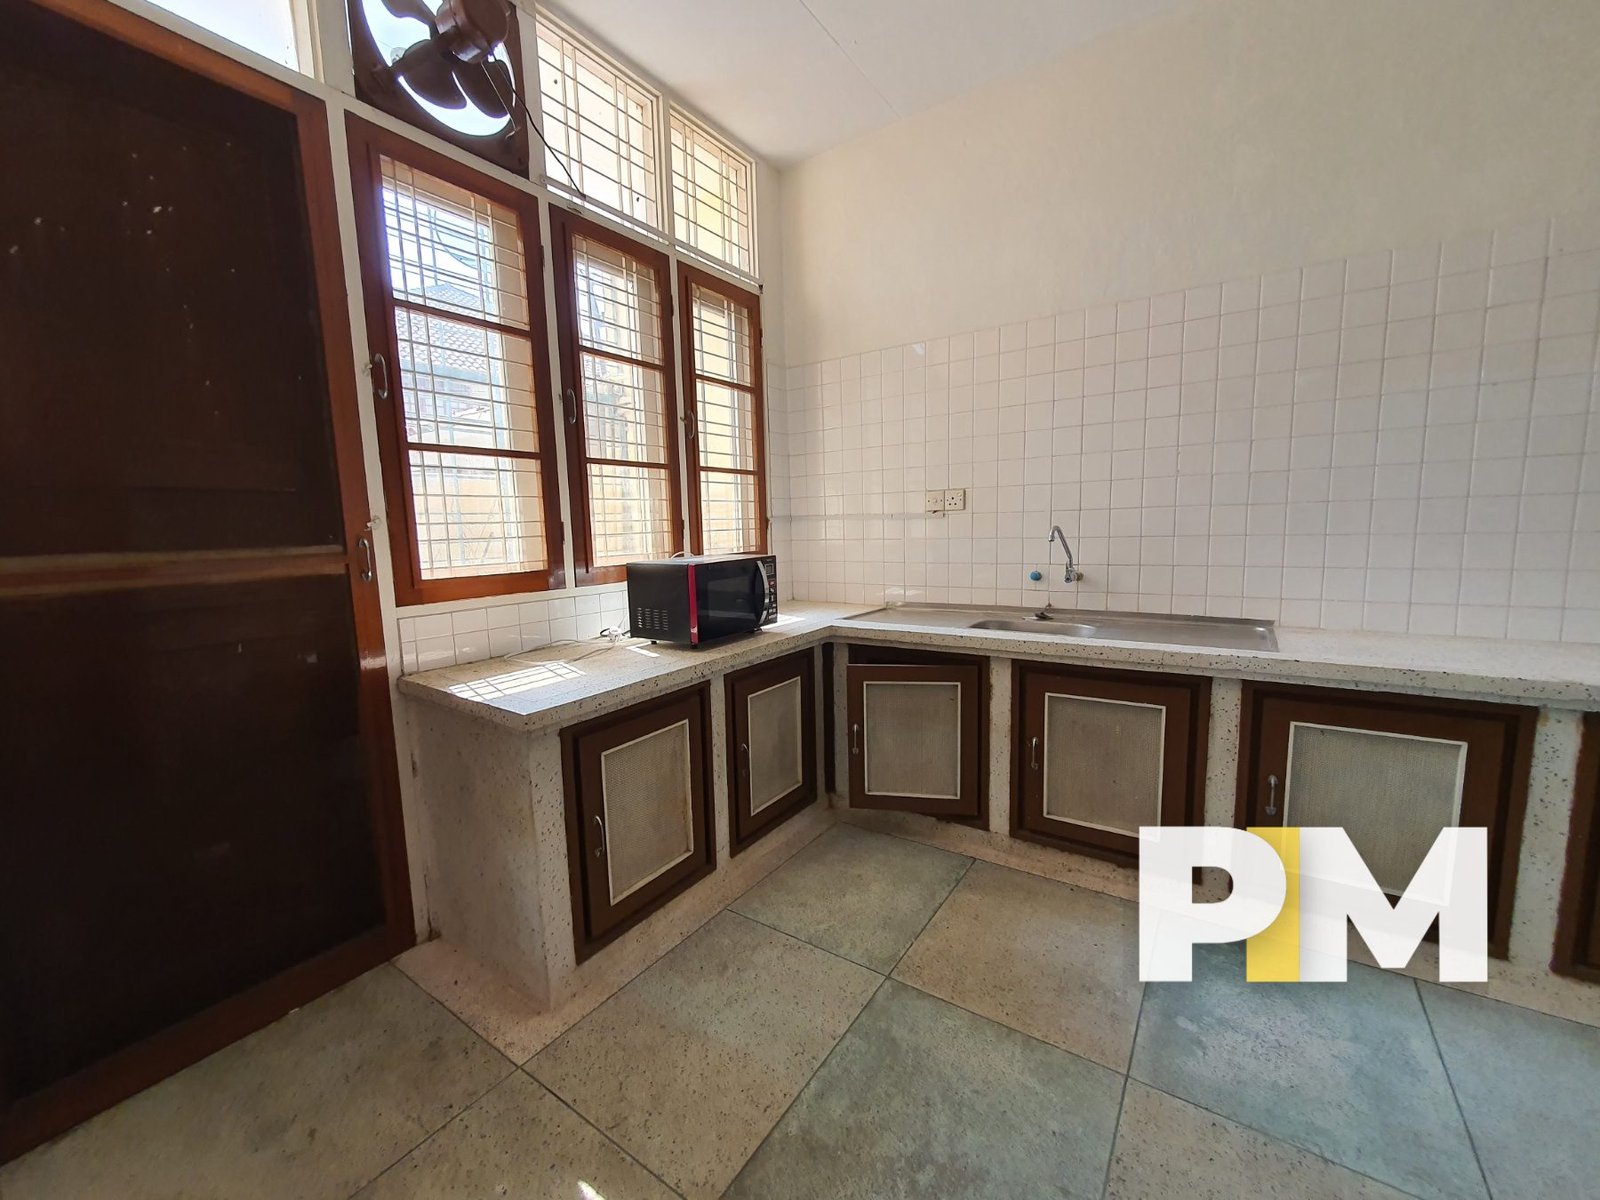 Kitchen room with sink - Myanmar Real Estate